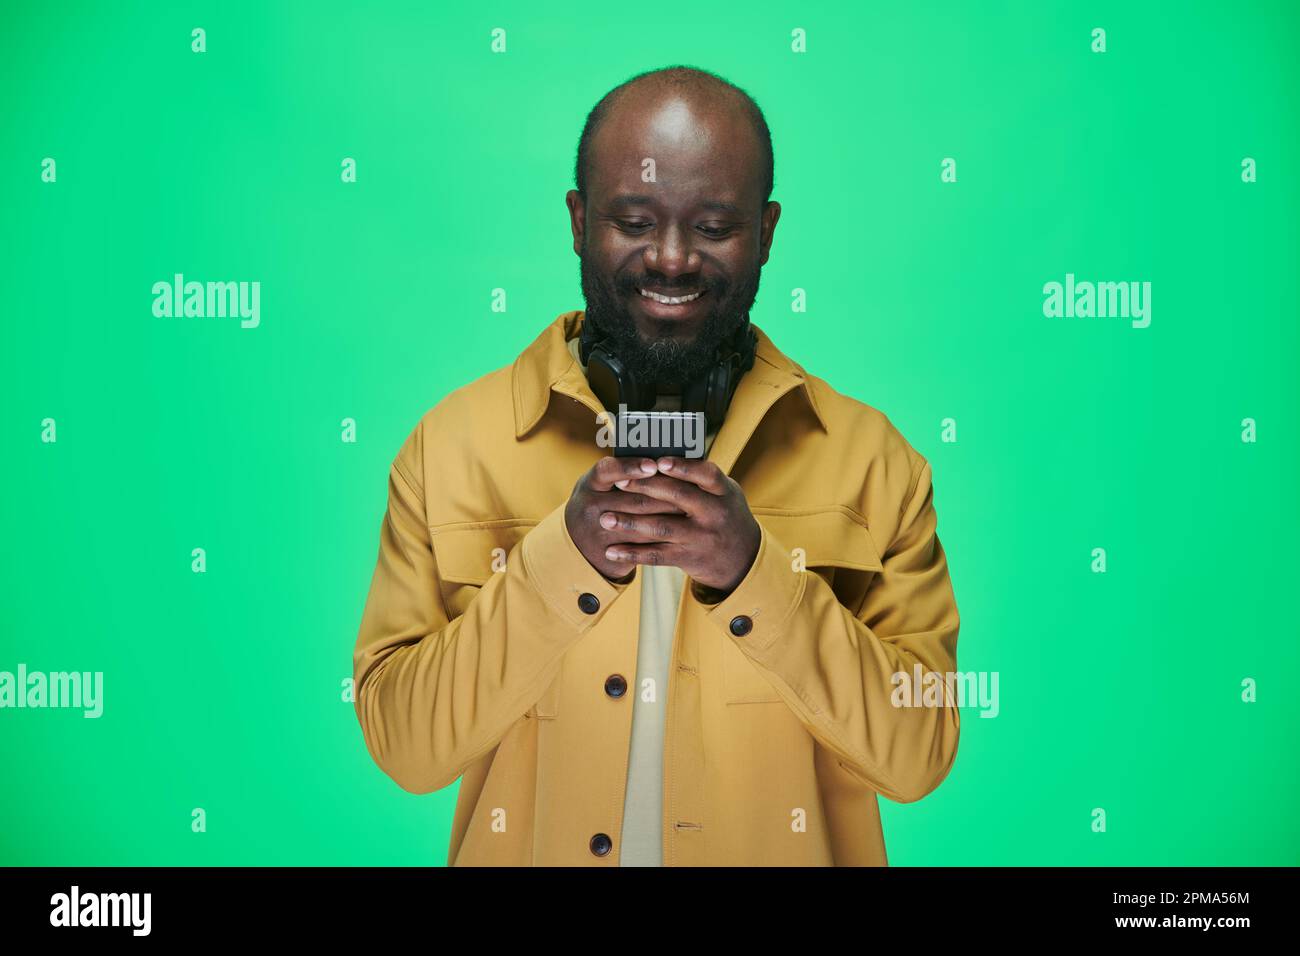 African American man reading a message on his mobile phone and smiling standing against green background Stock Photo